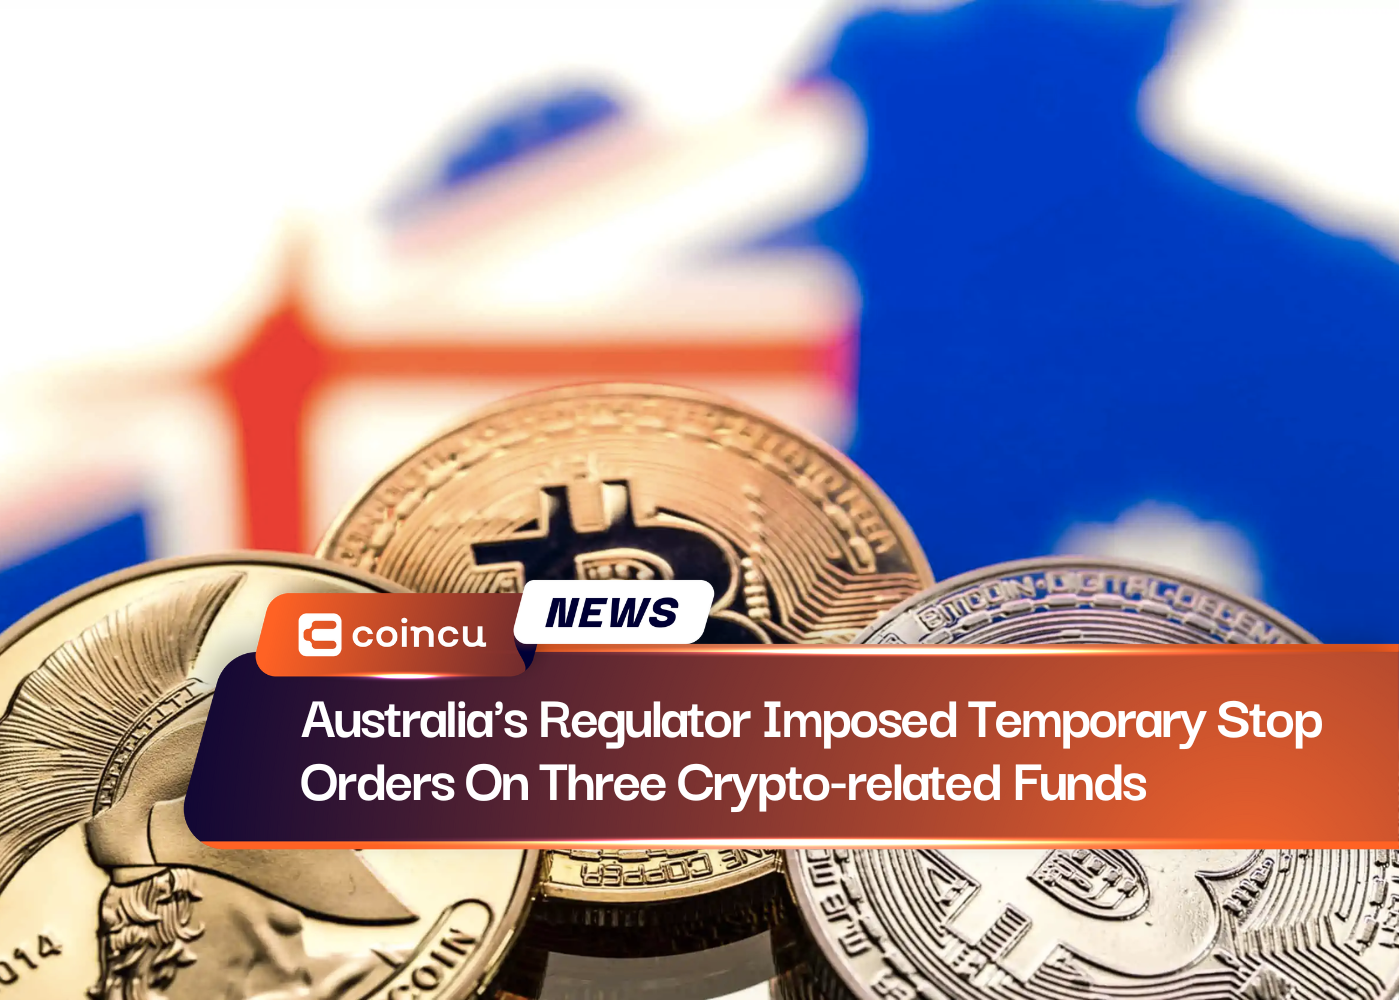 Australia's Regulator Imposed Temporary Stop Orders On Three Crypto-related Funds